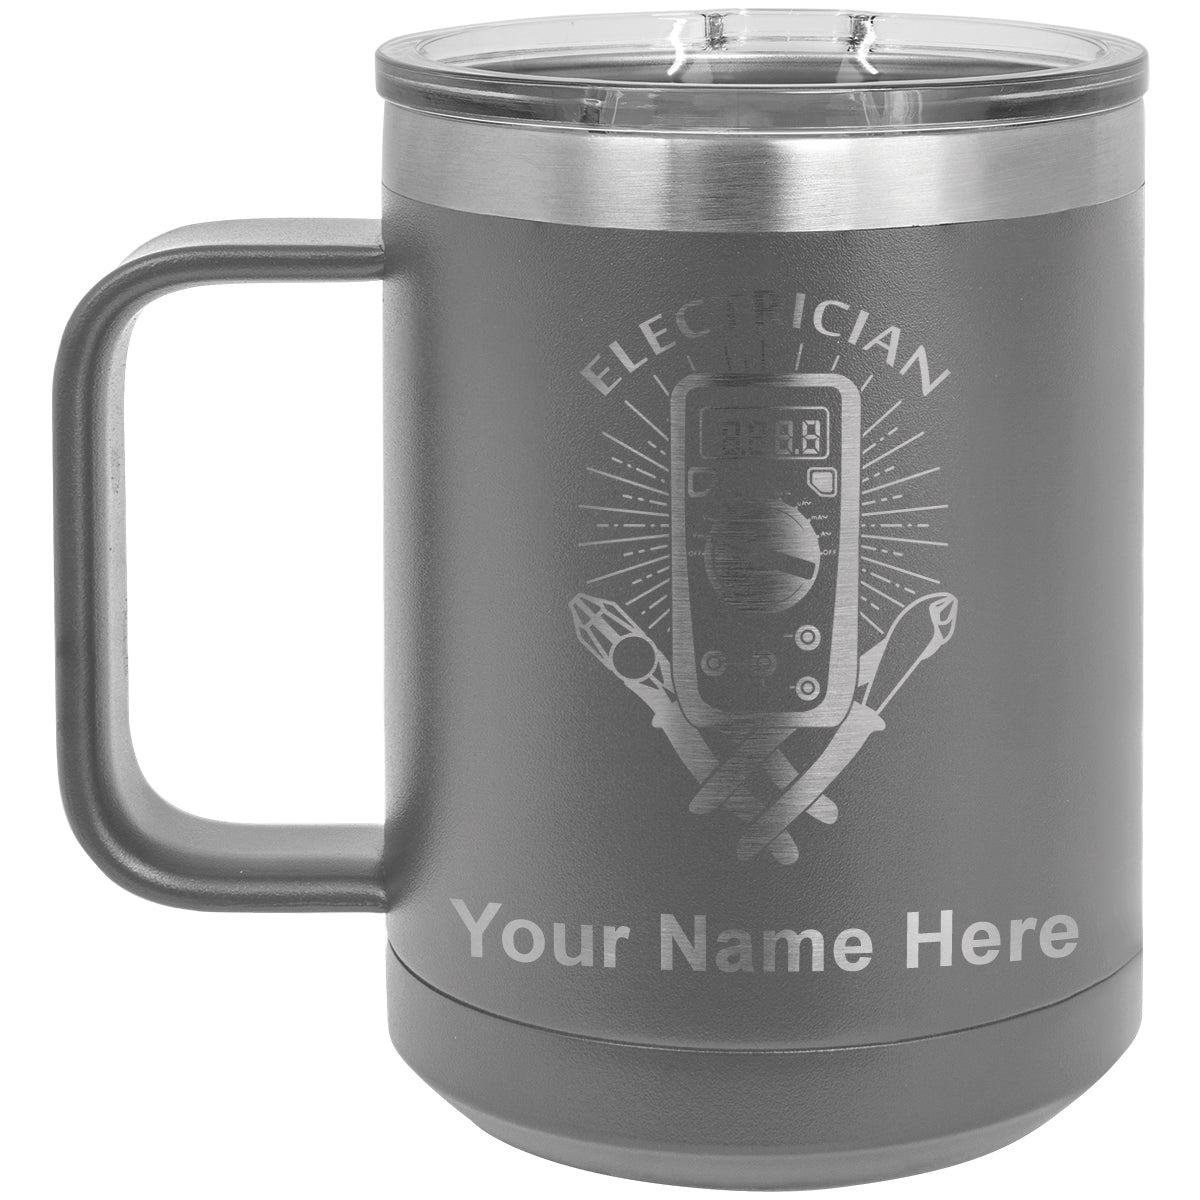 15oz Vacuum Insulated Coffee Mug, Electrician, Personalized Engraving Included